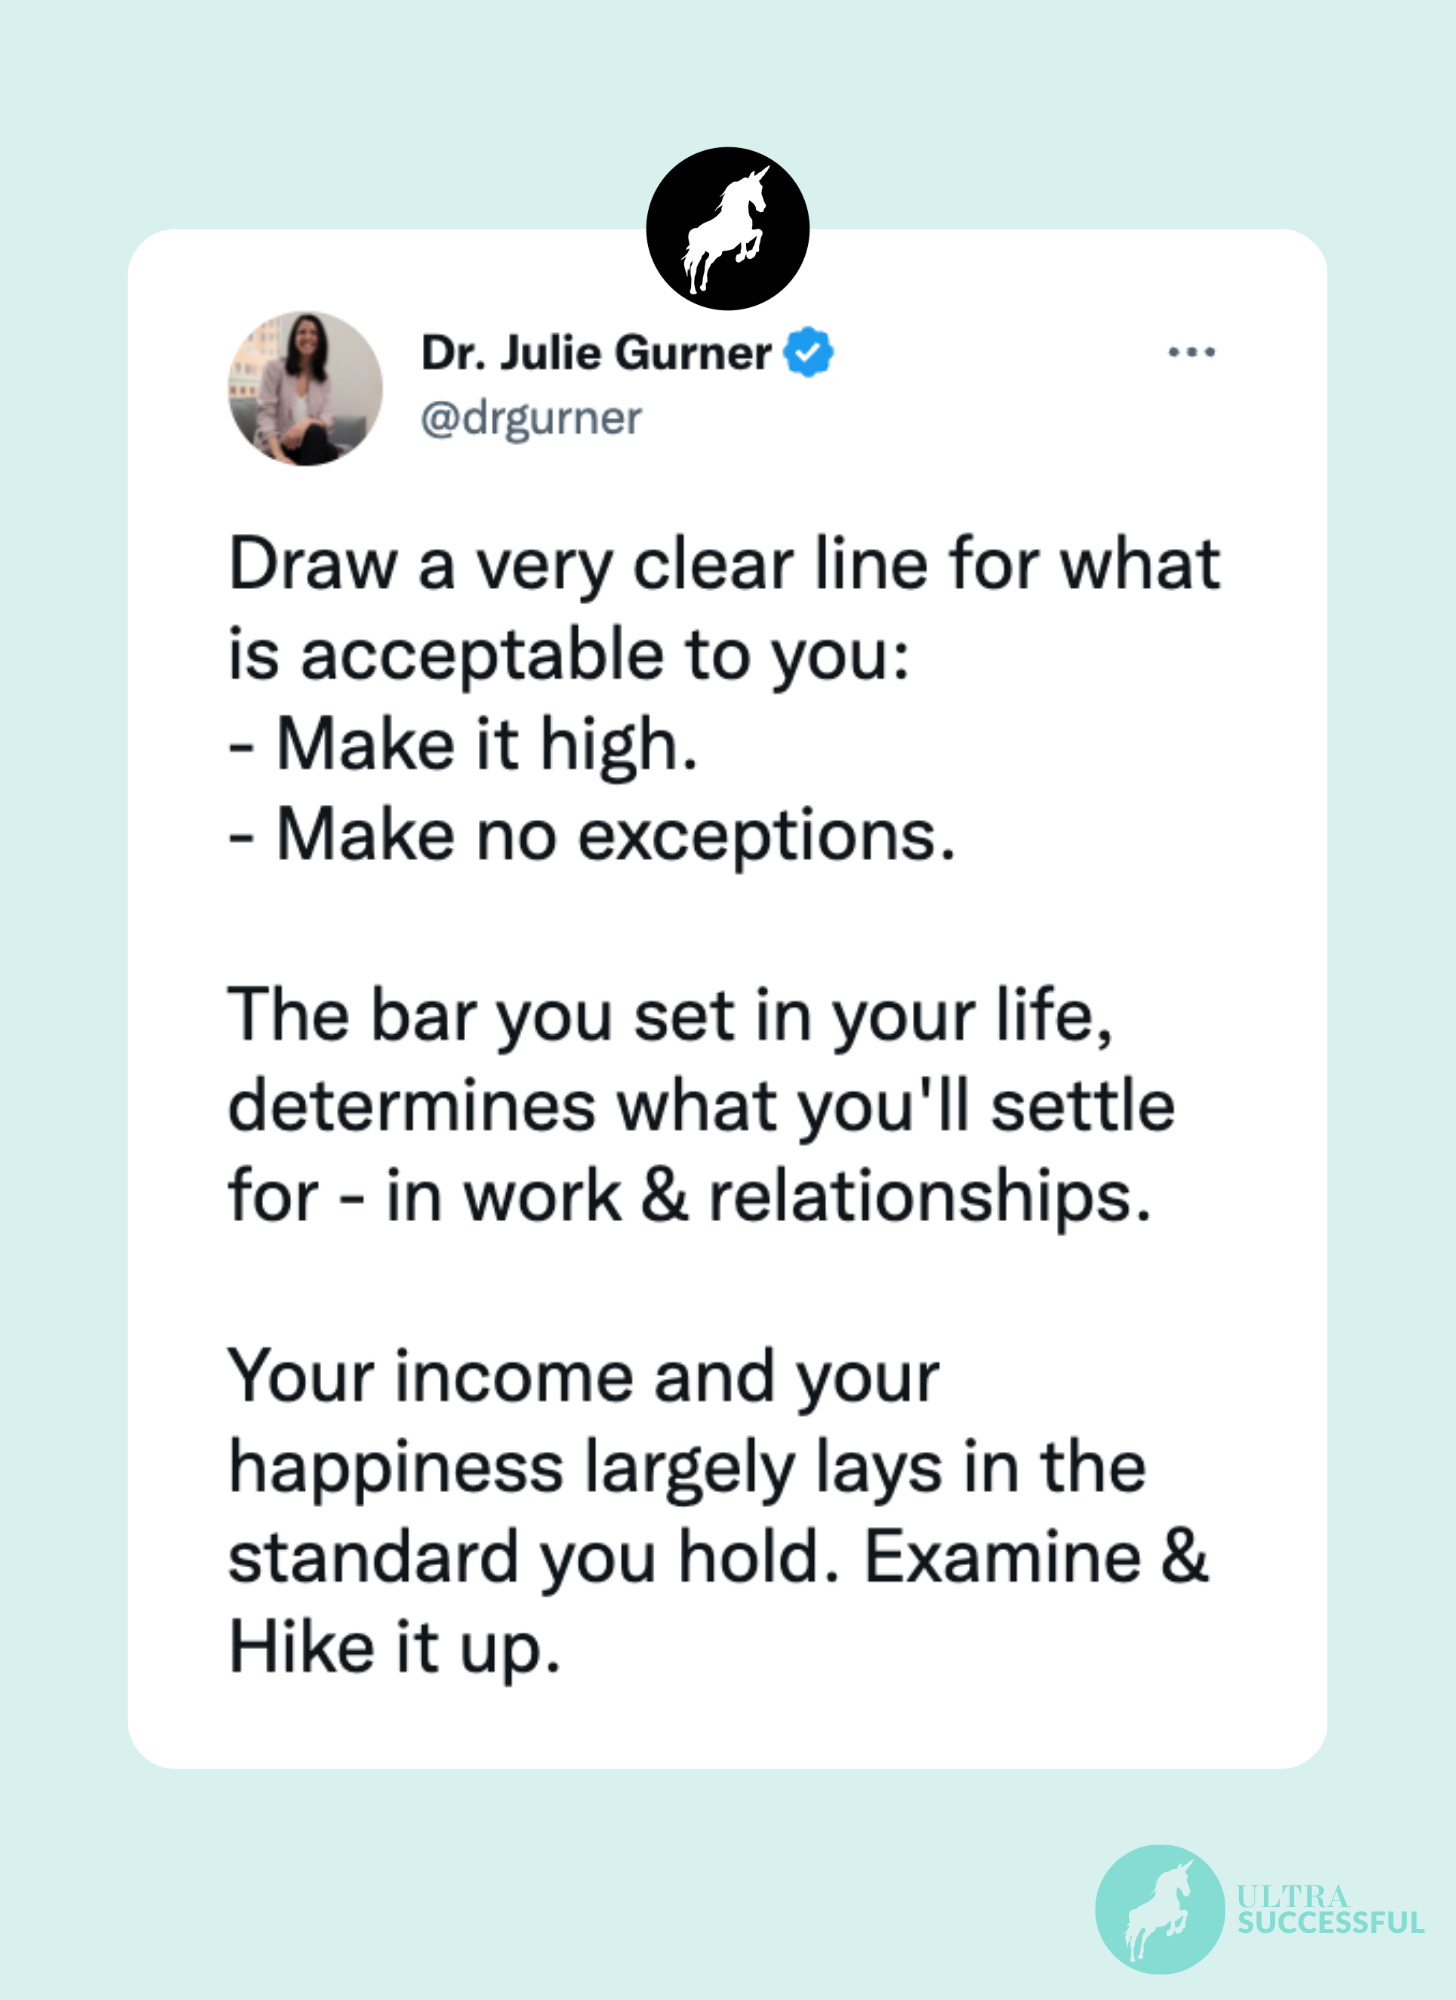 @drgurner: Draw a very clear line for what is acceptable to you: - Make it high. - Make no exceptions.  The bar you set in your life, determines what you'll settle for - in work & relationships.   Your income and your happiness largely lays in the standard you hold. Examine & Hike it up.